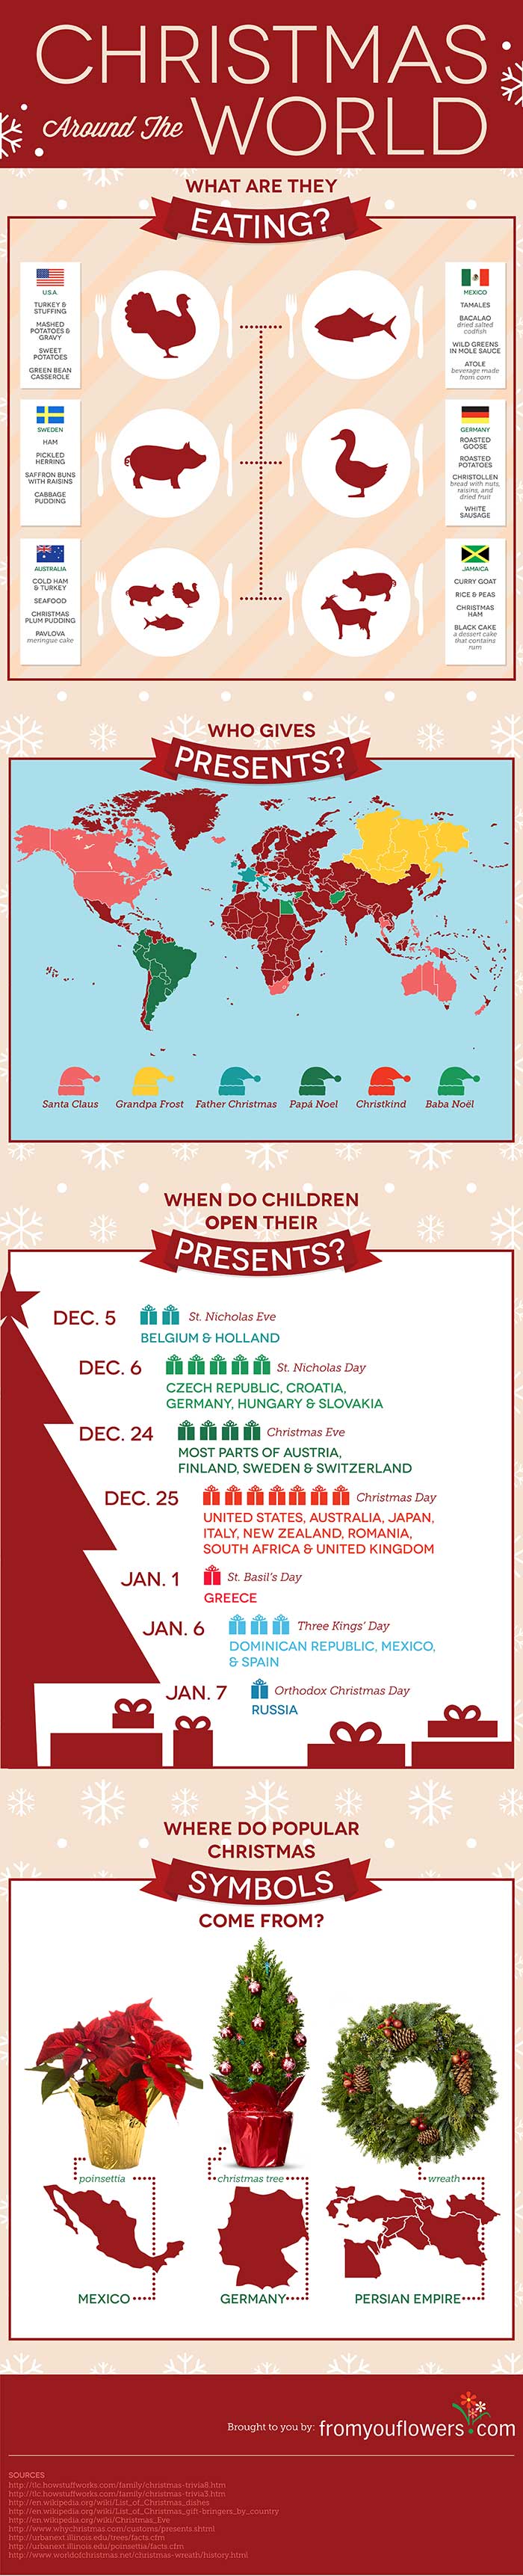 Christmas Traditions Around the World infographic, brought to you by From You Flowers